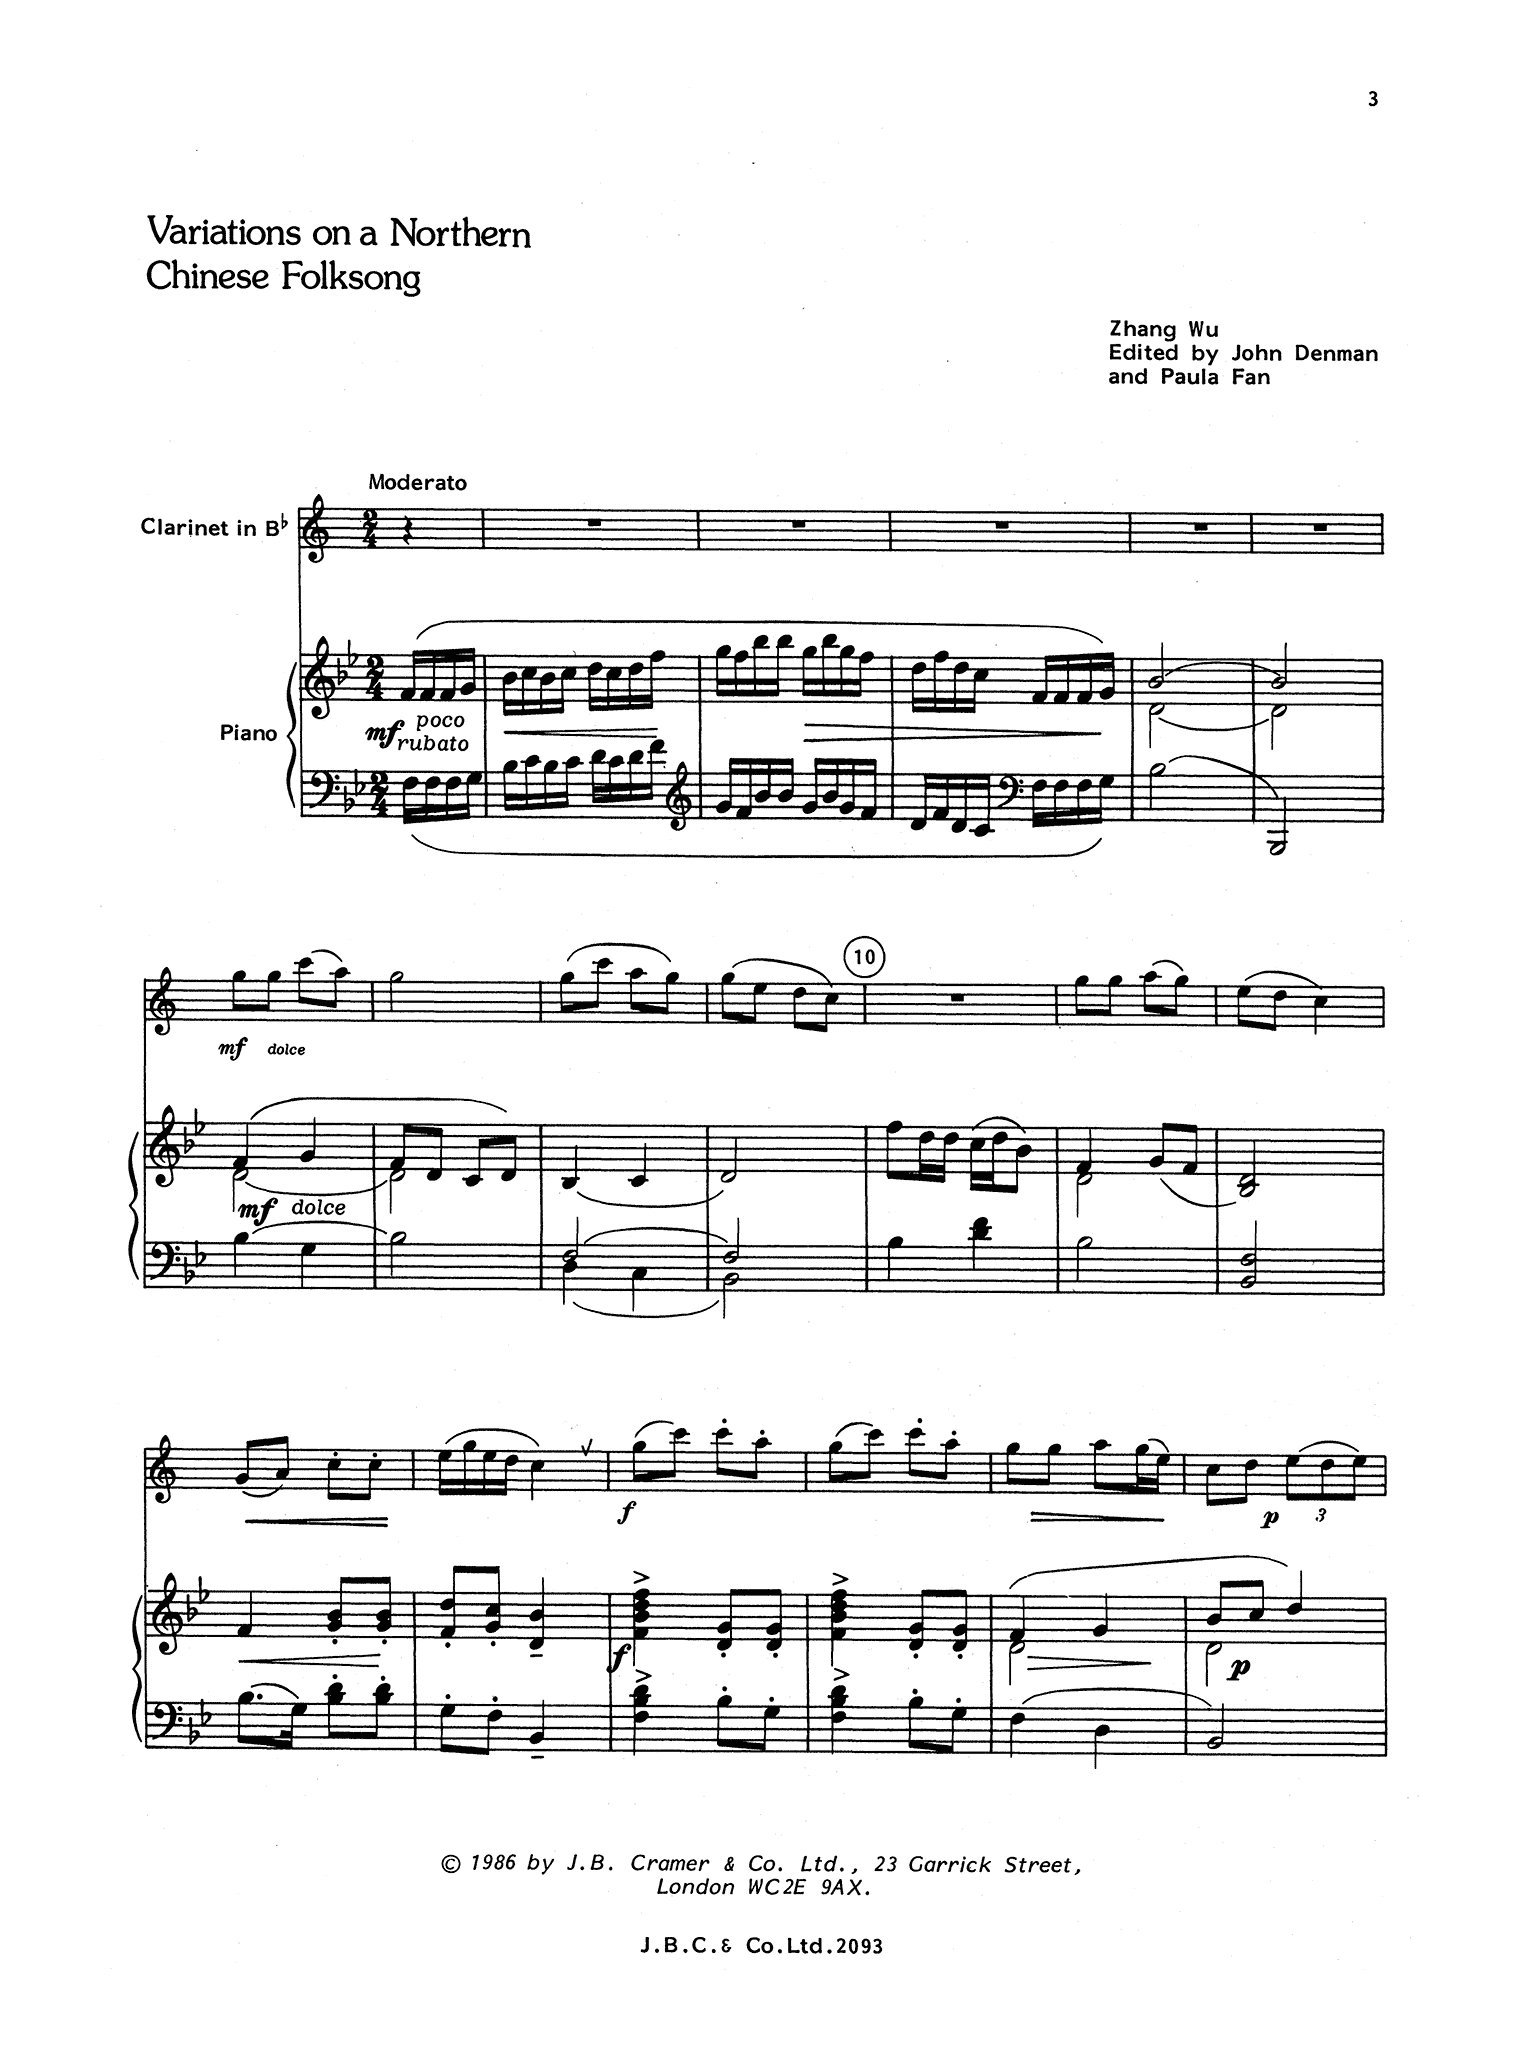 Zhang Wu Variations on a Northern Chinese Folksong score